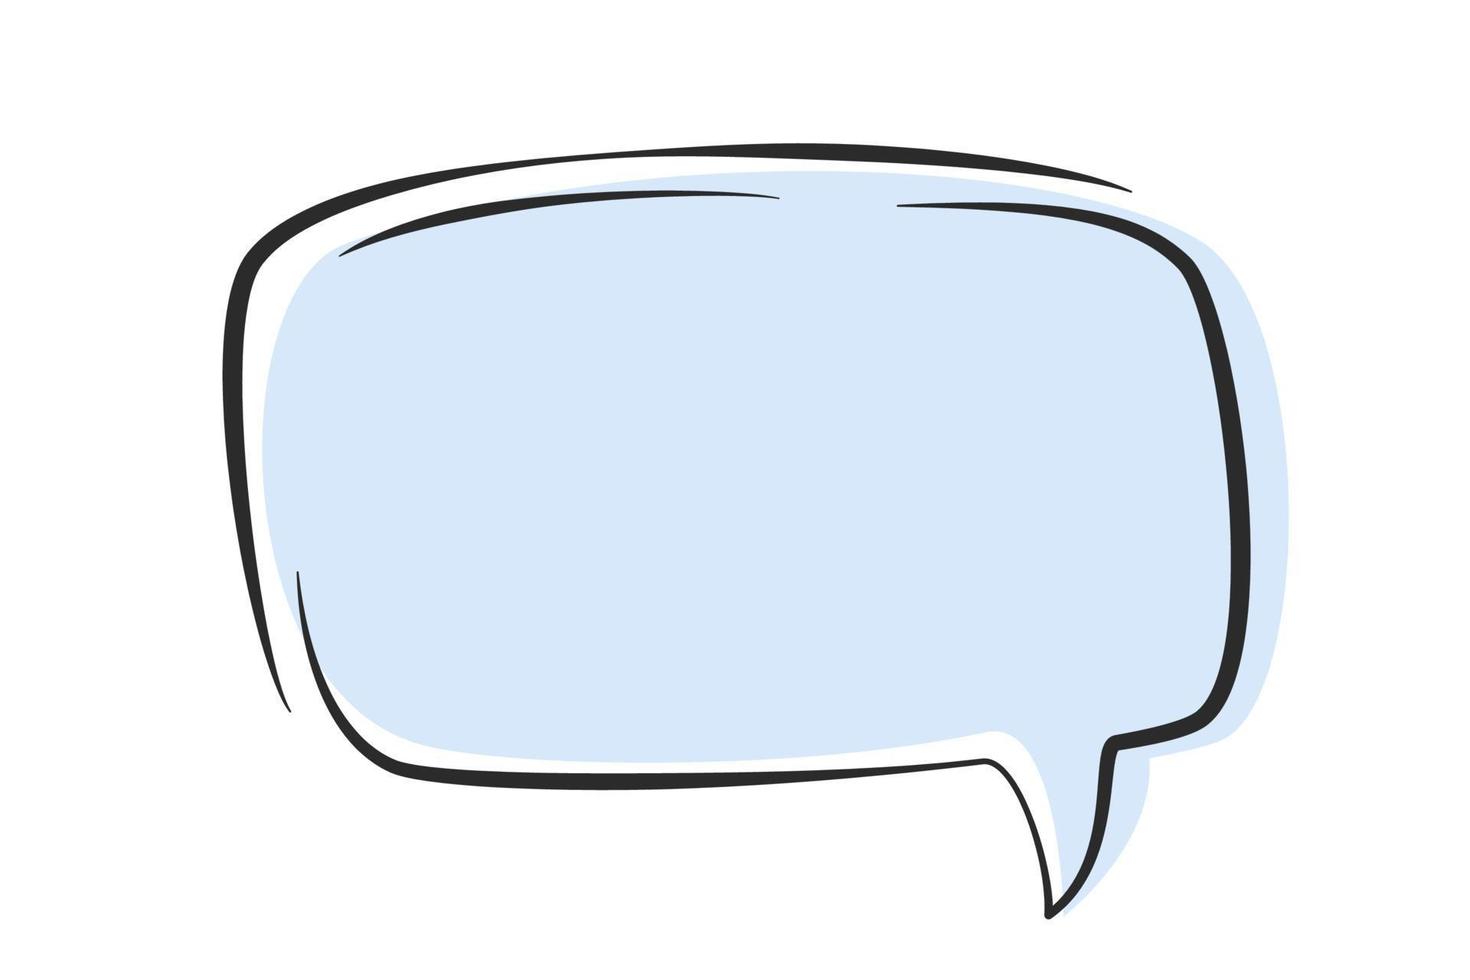 Speech bubble for text. Element design for chat or message. Vector illustration